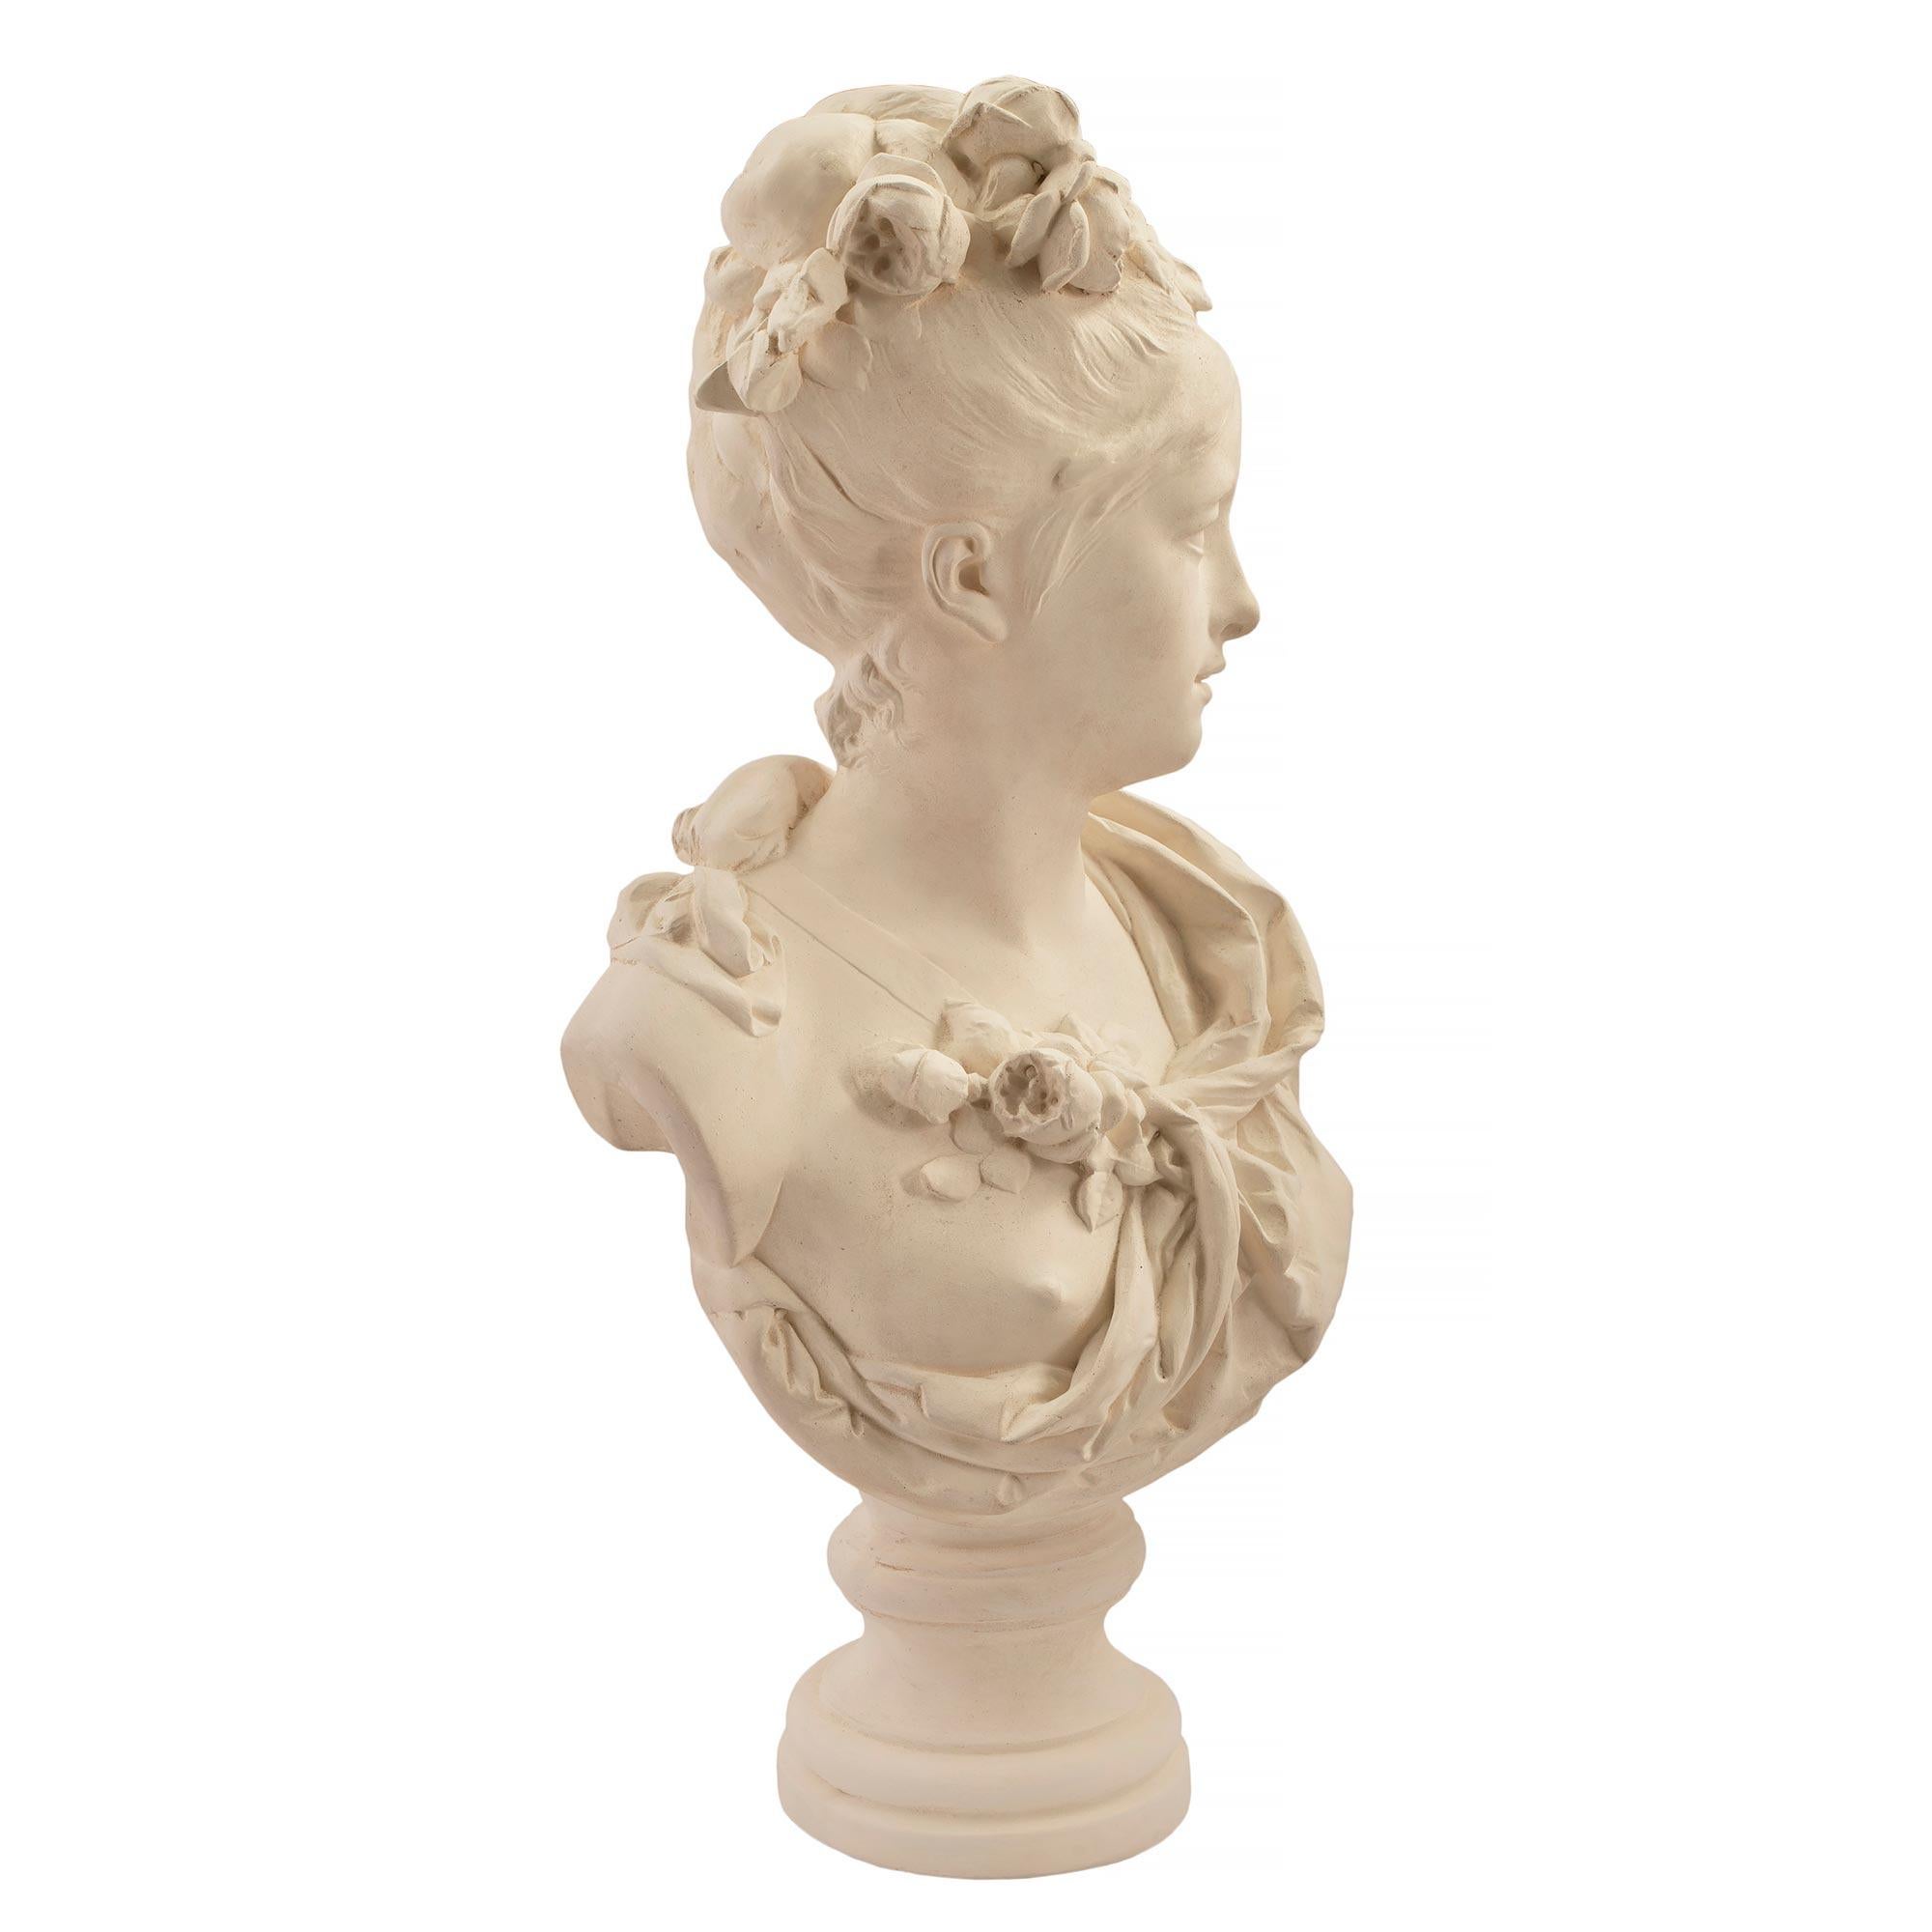 An elegant French mid-19th century plaster bust of a young lady, signed Albert-Ernest Carrier Belleuse. The bust of a young lady in classical attire accented with a small bouquet of flowers. She is wearing her hair in an updo decorated by row of